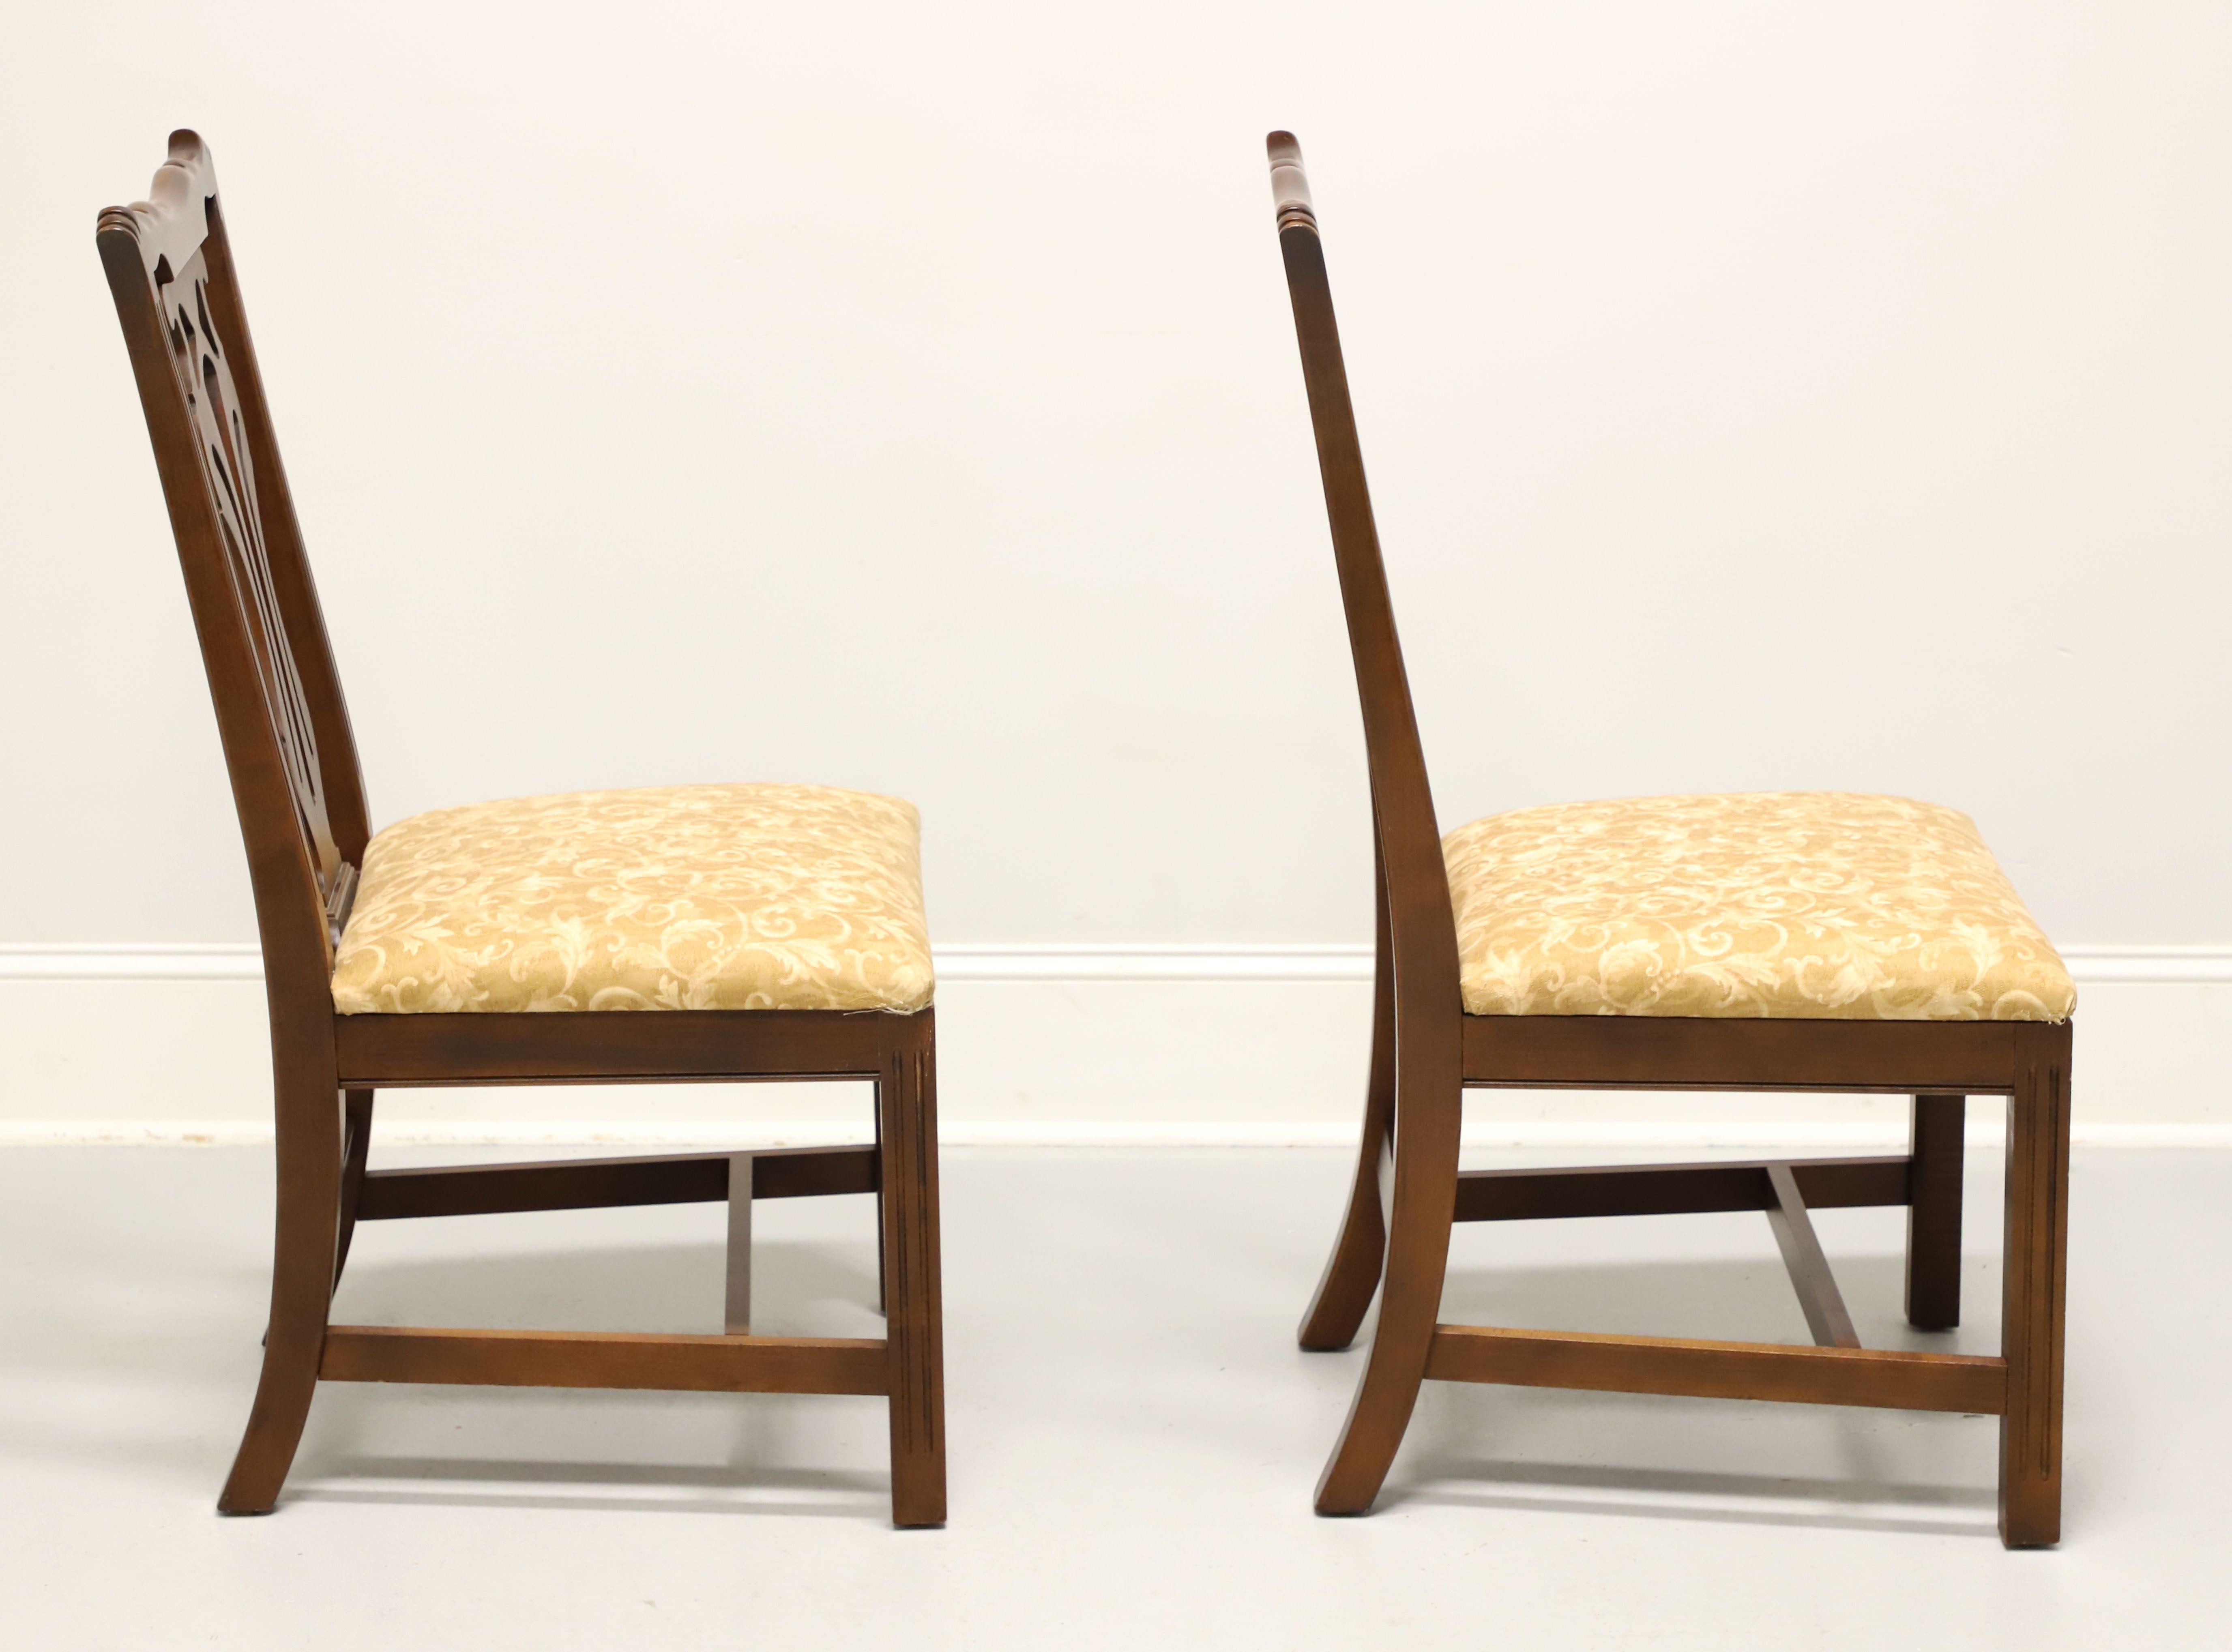 KNOB CREEK Mahogany Chippendale Dining Side Chairs - Pair B In Good Condition For Sale In Charlotte, NC